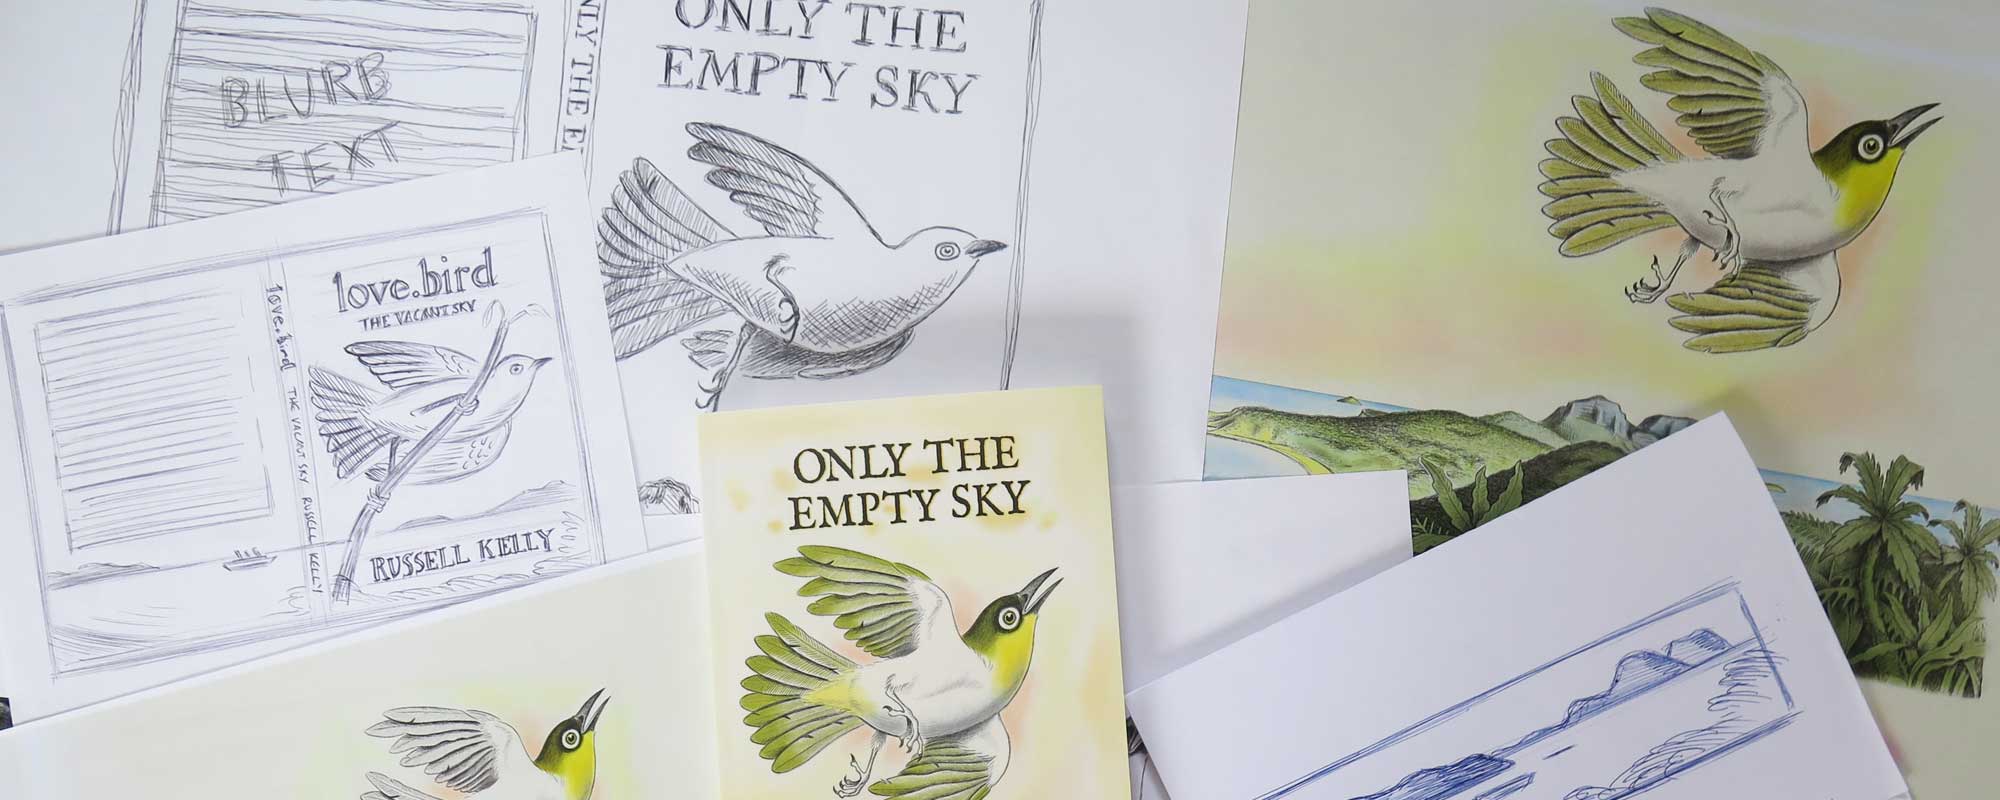 Only The Empty Sky sketches, finished art and printed book.